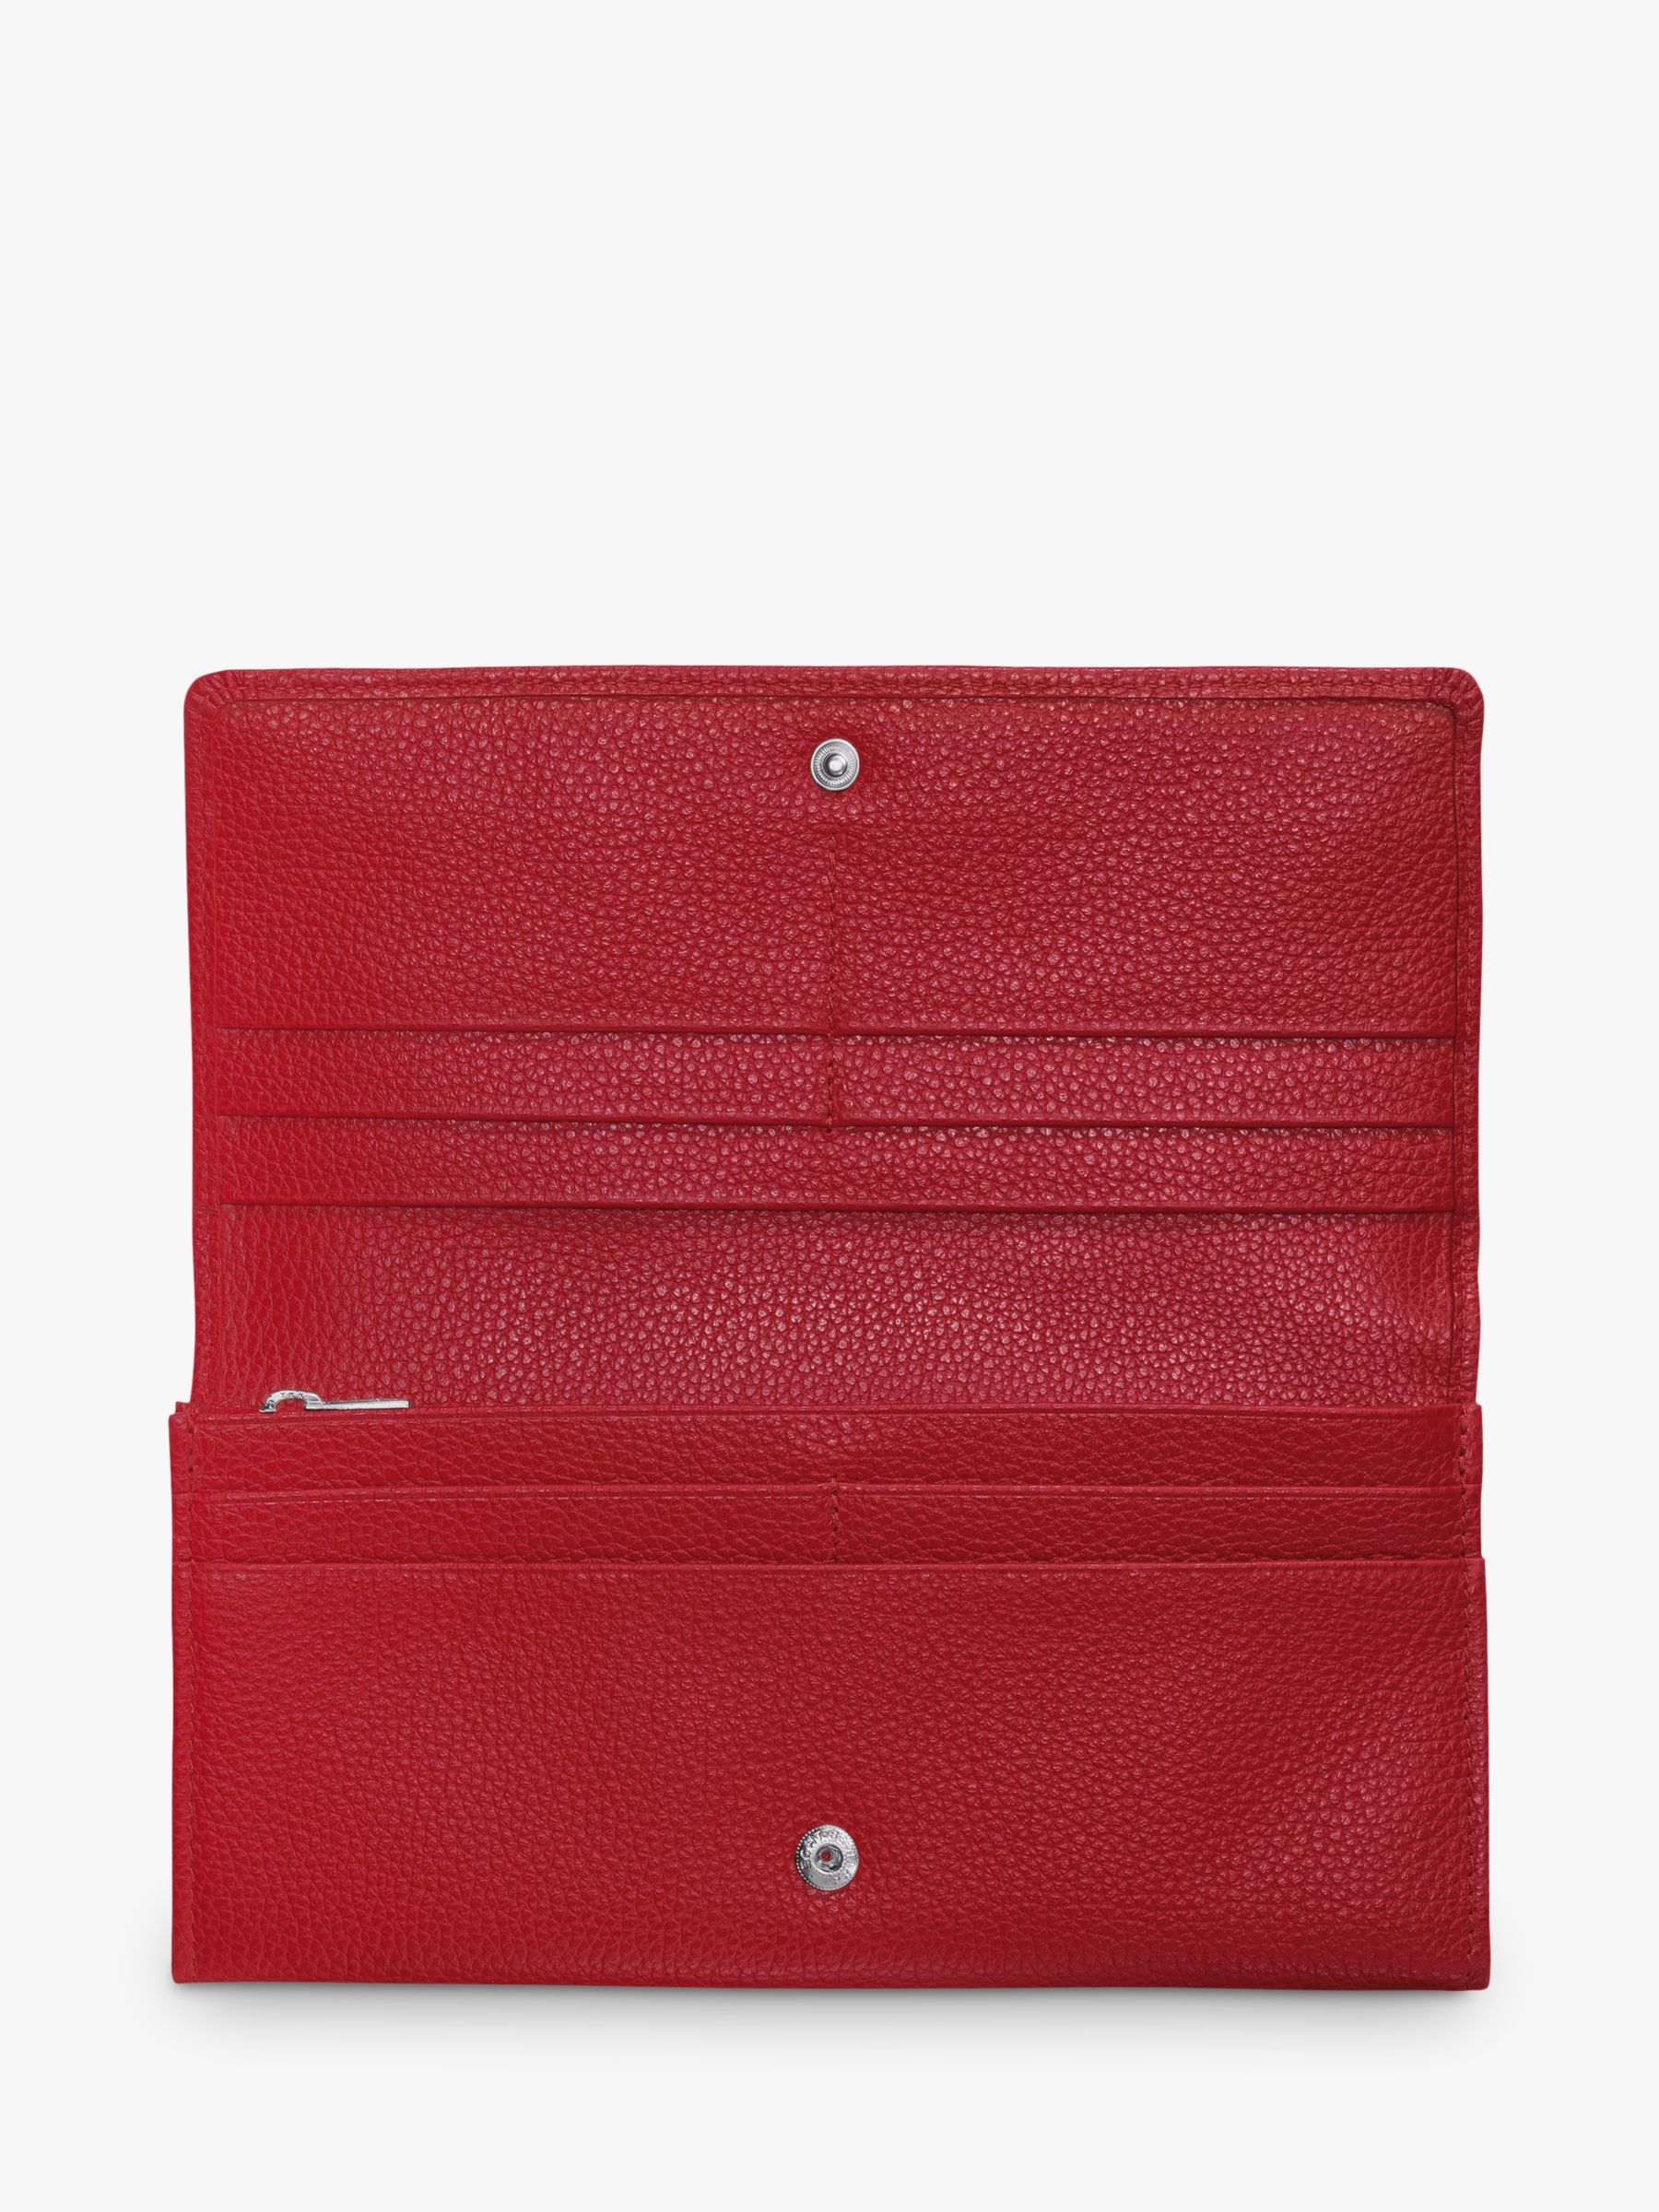 Longchamp Le Foulonné Continental Leather Wallet, Red at John Lewis ...